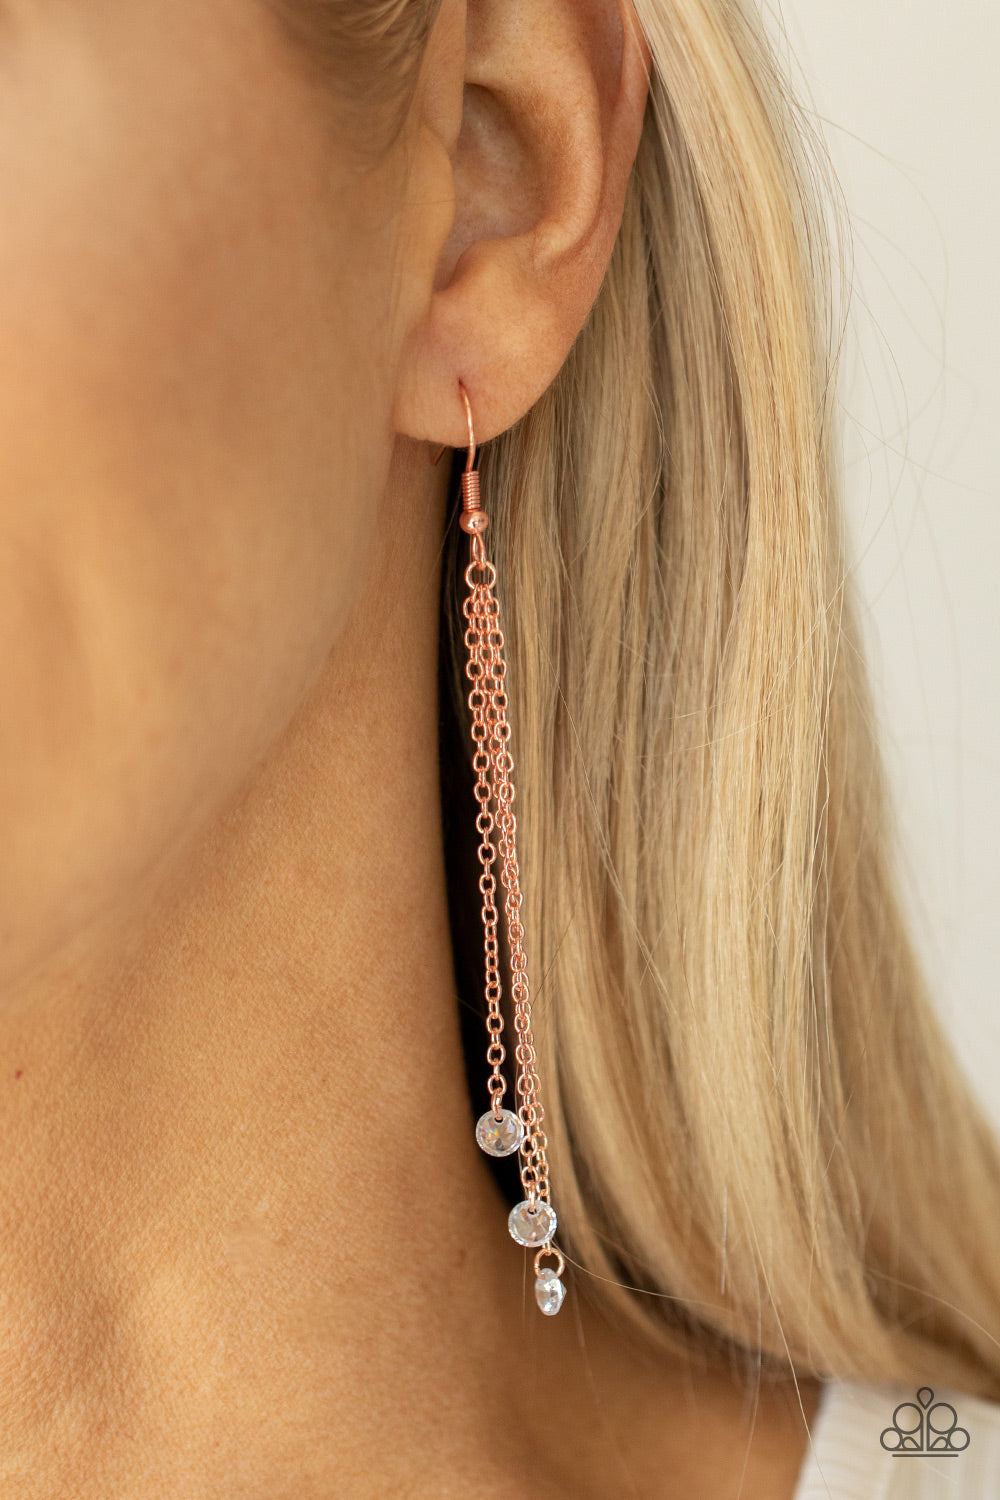 Divine Droplets - White and Copper Earrings- Paparazzi Accessories